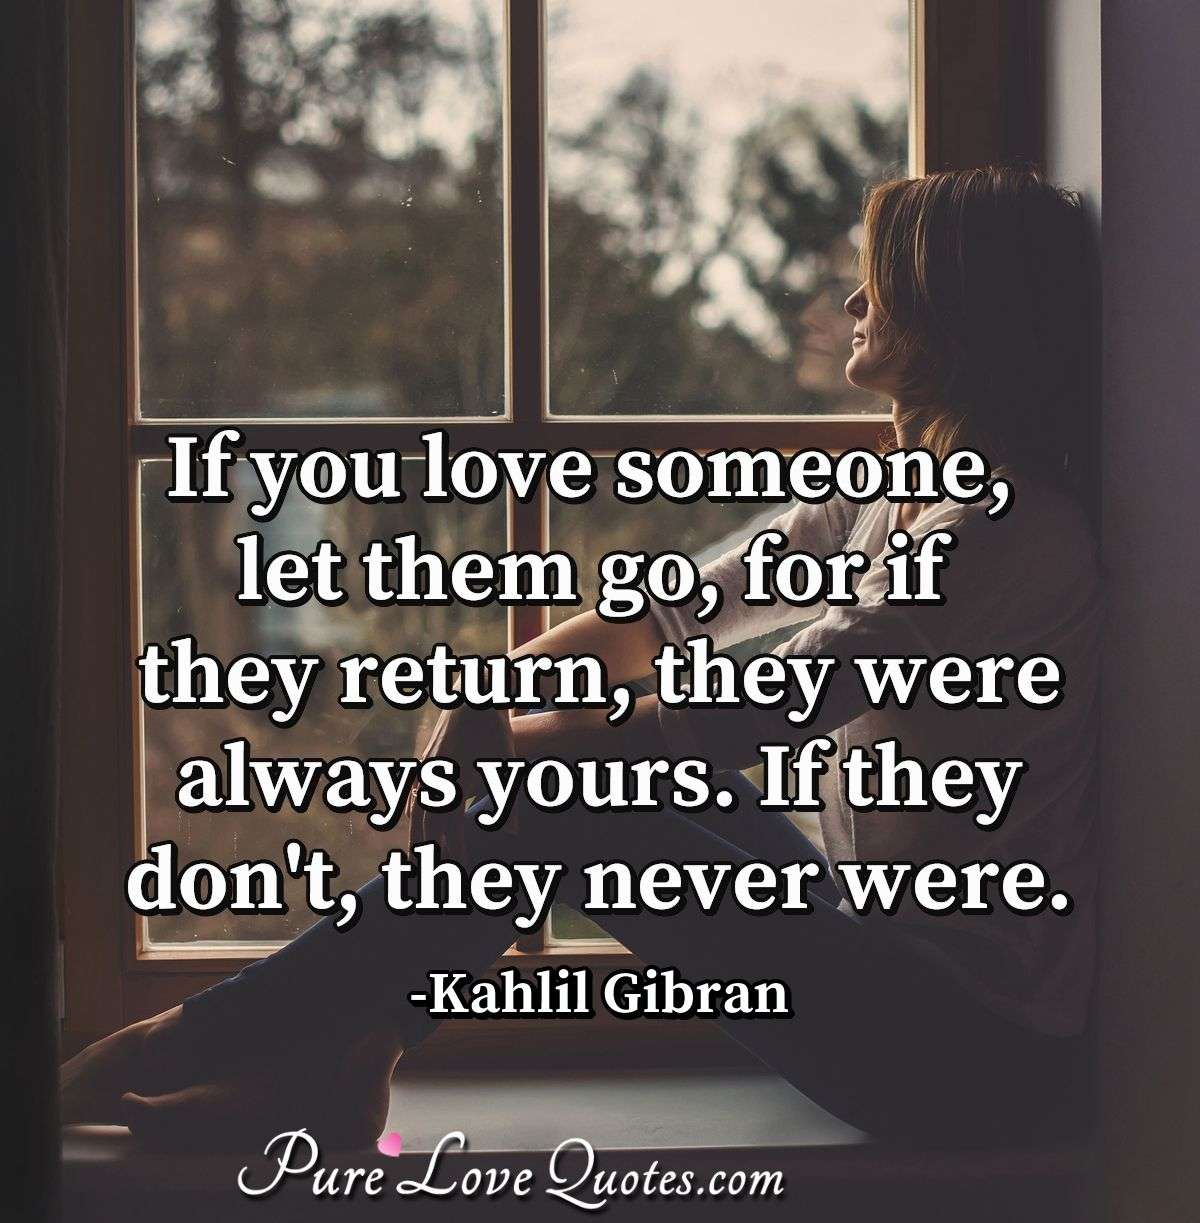 If you love someone, let them go, for if they return, they were always yours. If they don't, they never were. - Kahlil Gibran